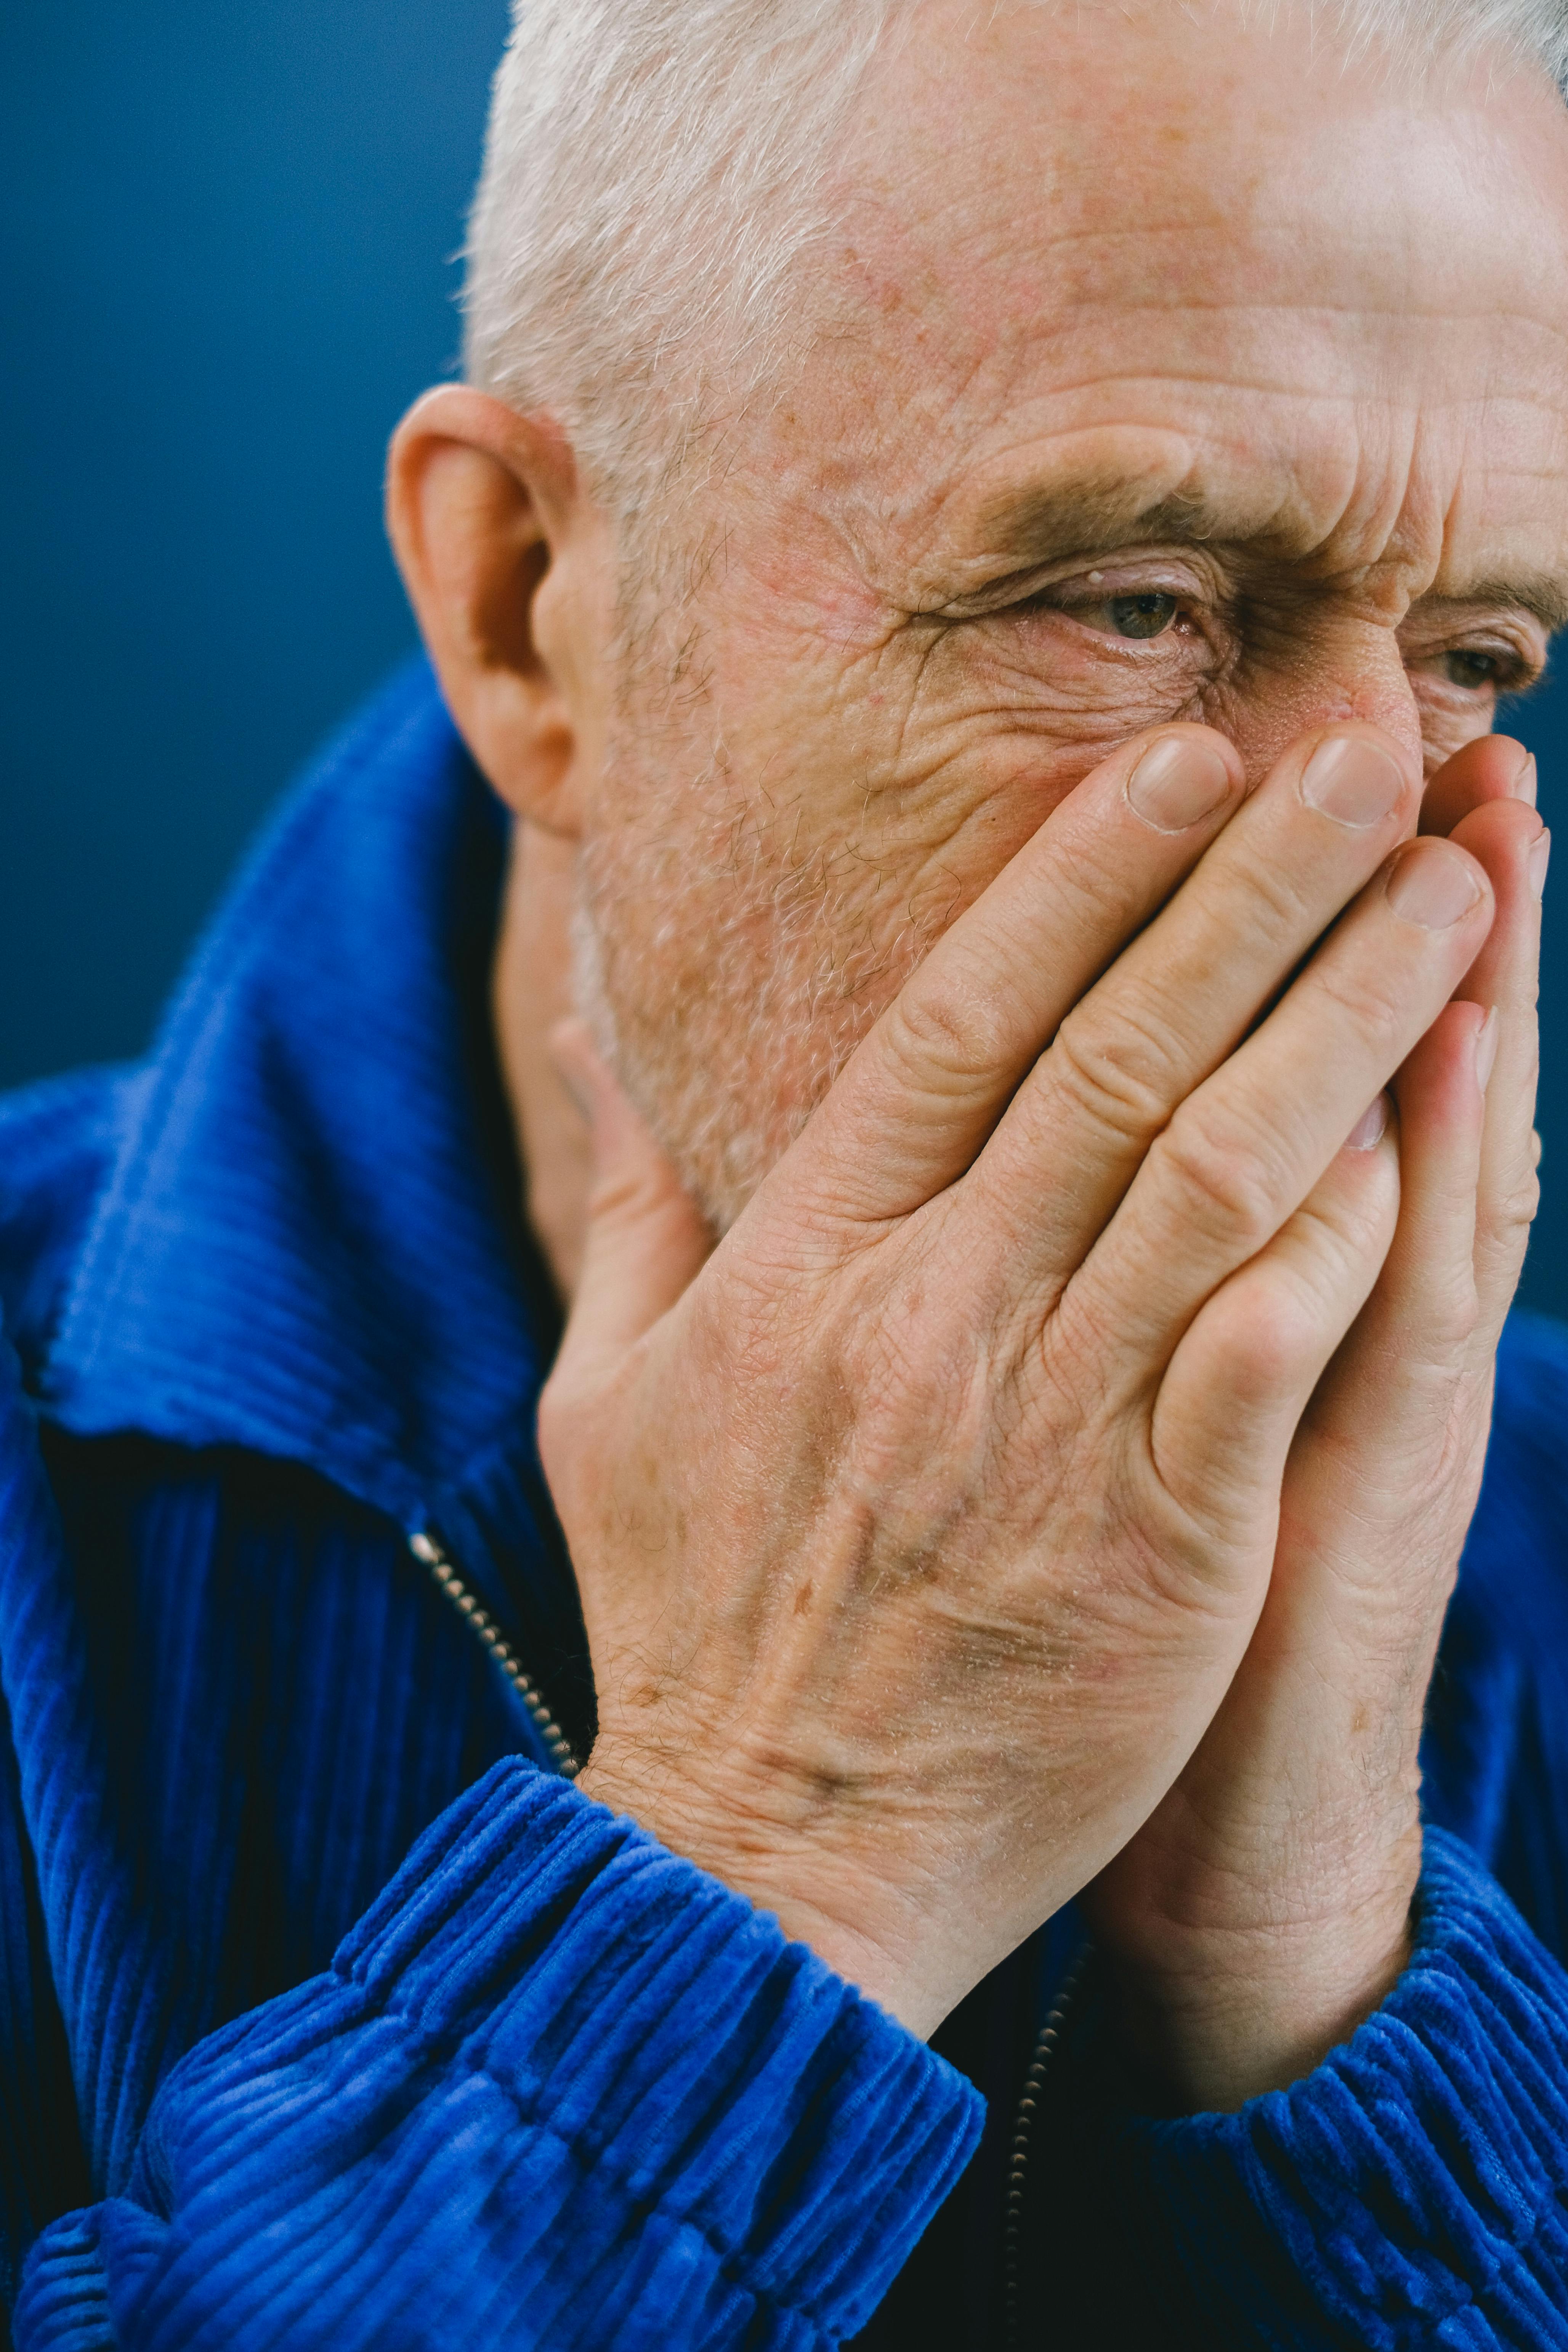 A man covering his mouth and nose with his hands while looking sad | Source: Pexels